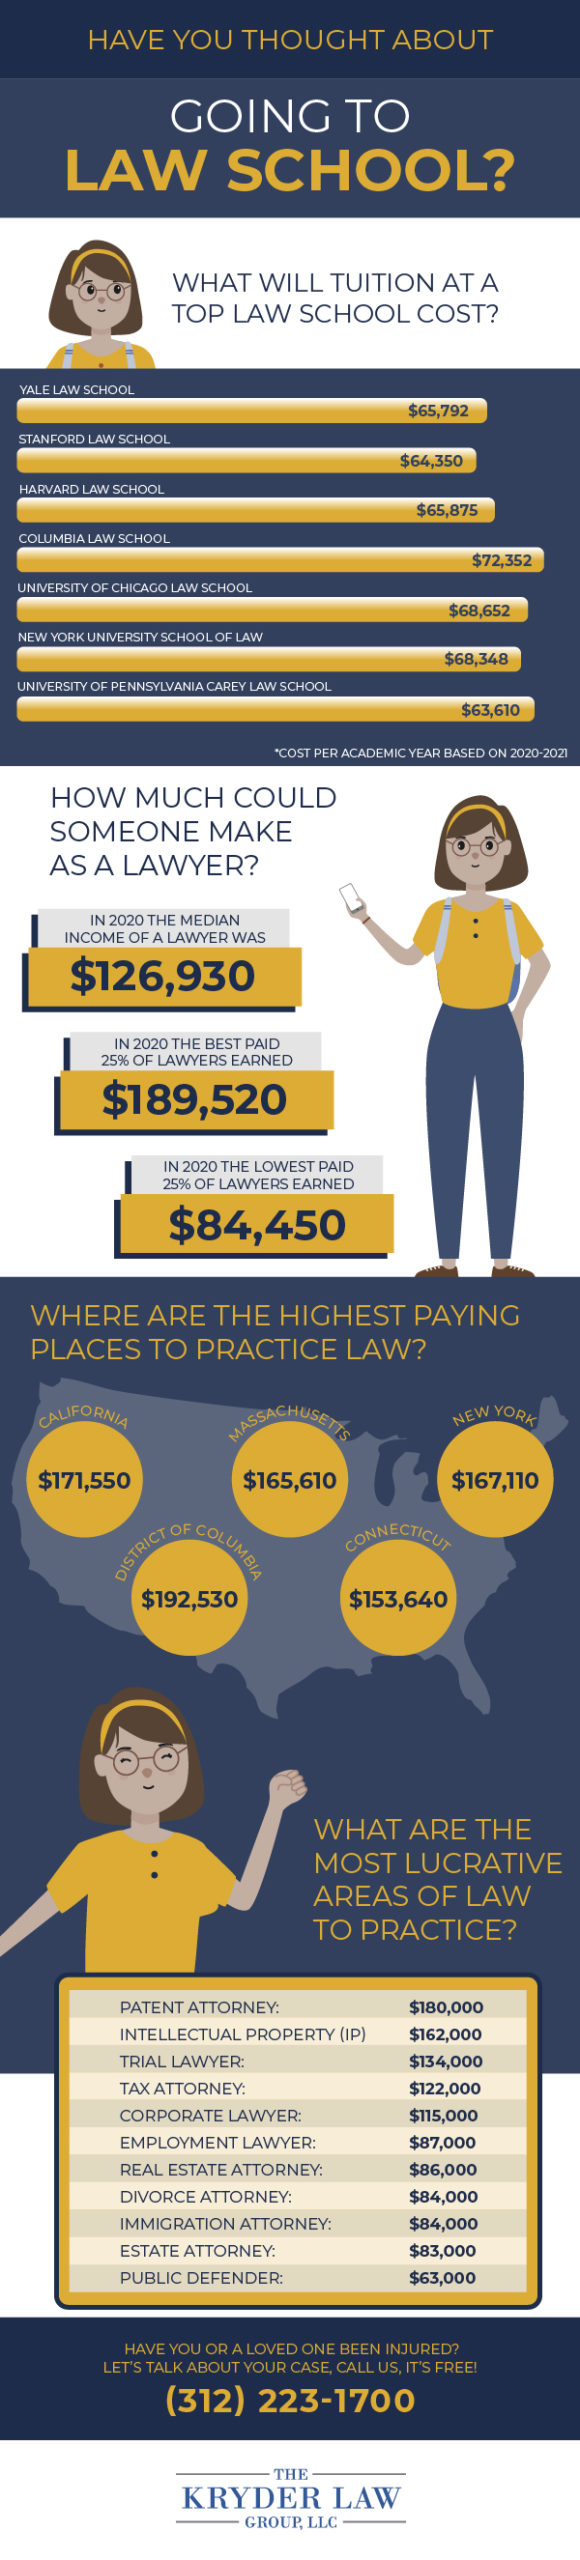 Going to Law School Infographic